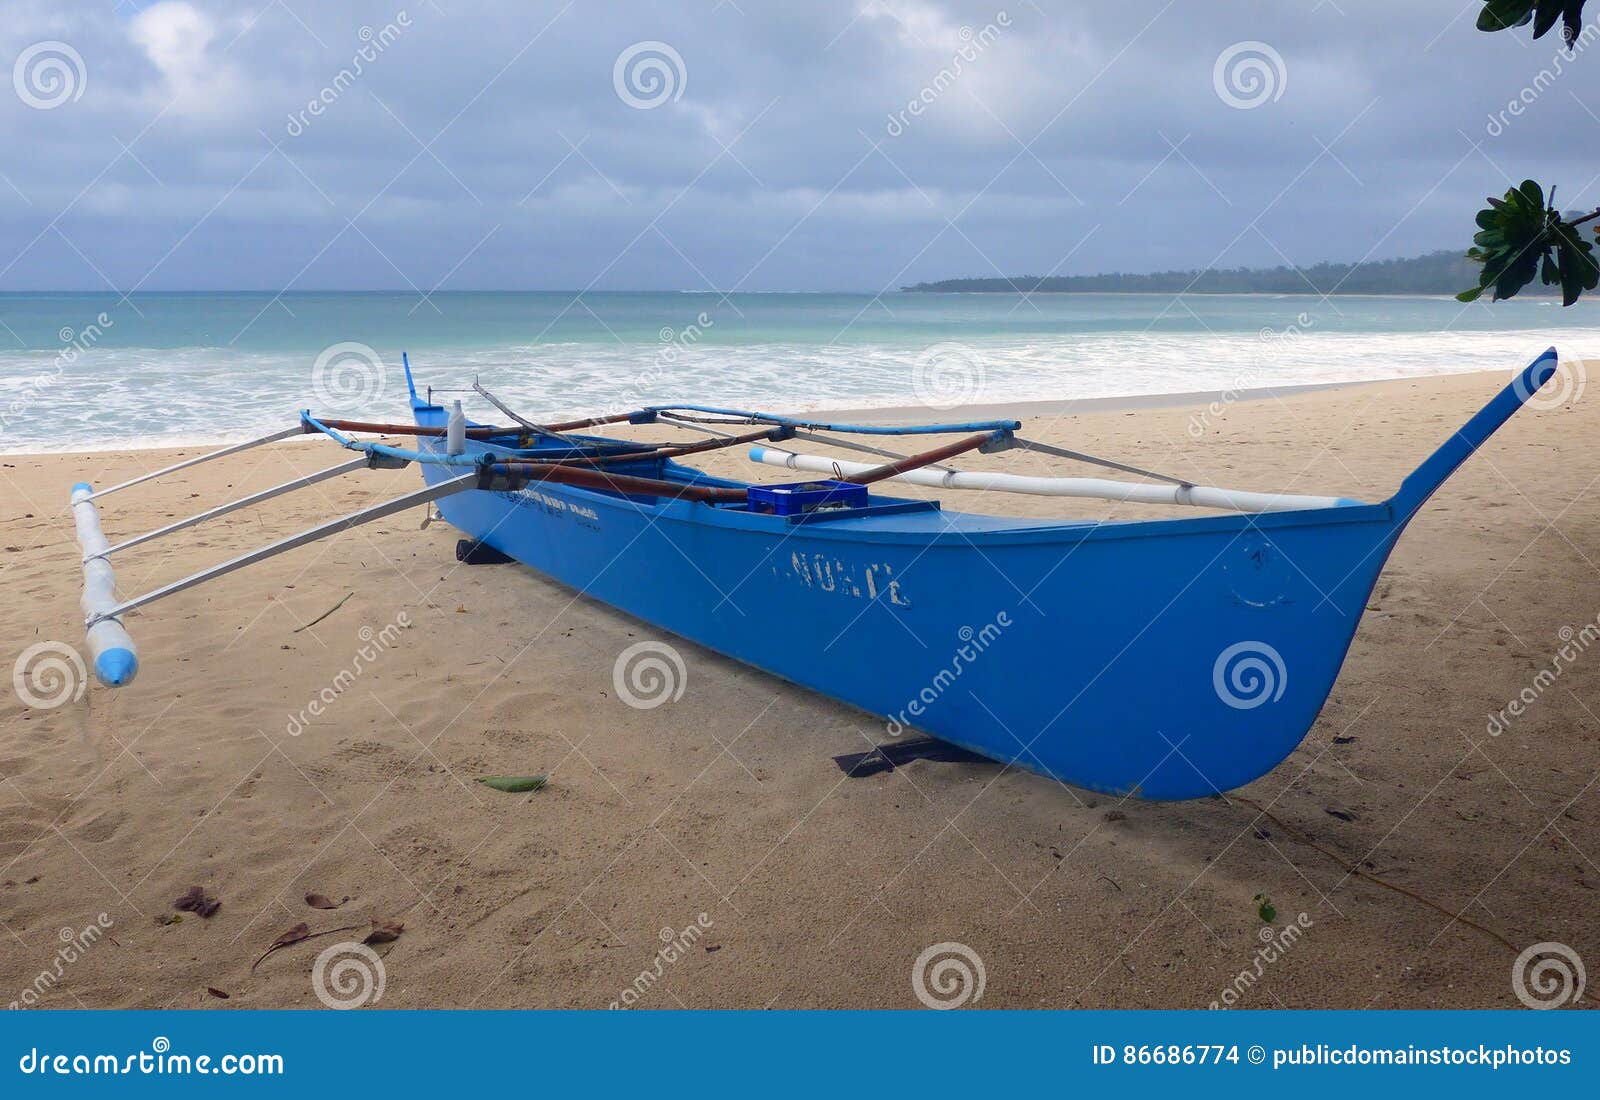 Fishing Boat. (Banca) Philippines Picture. Image: 86686774